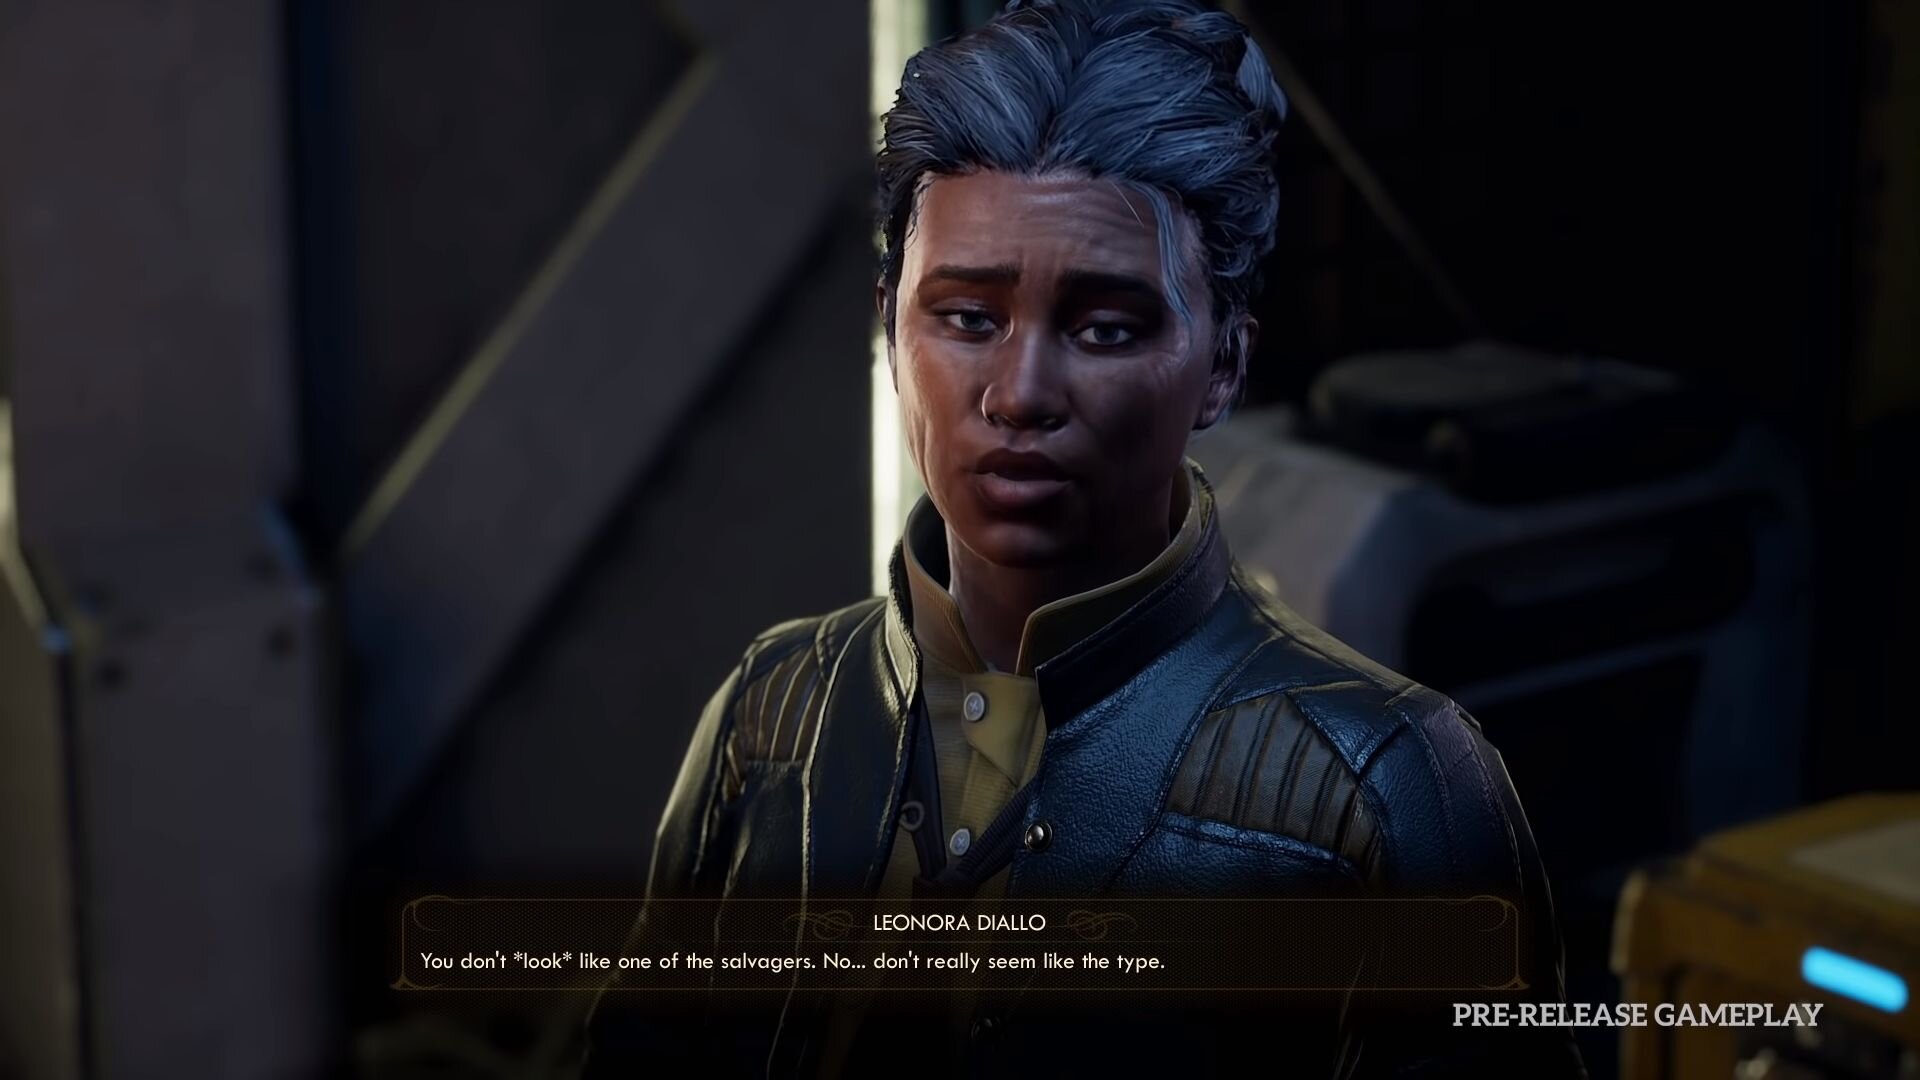 The Outer Worlds: Peril on Gorgon gets an extended gameplay video